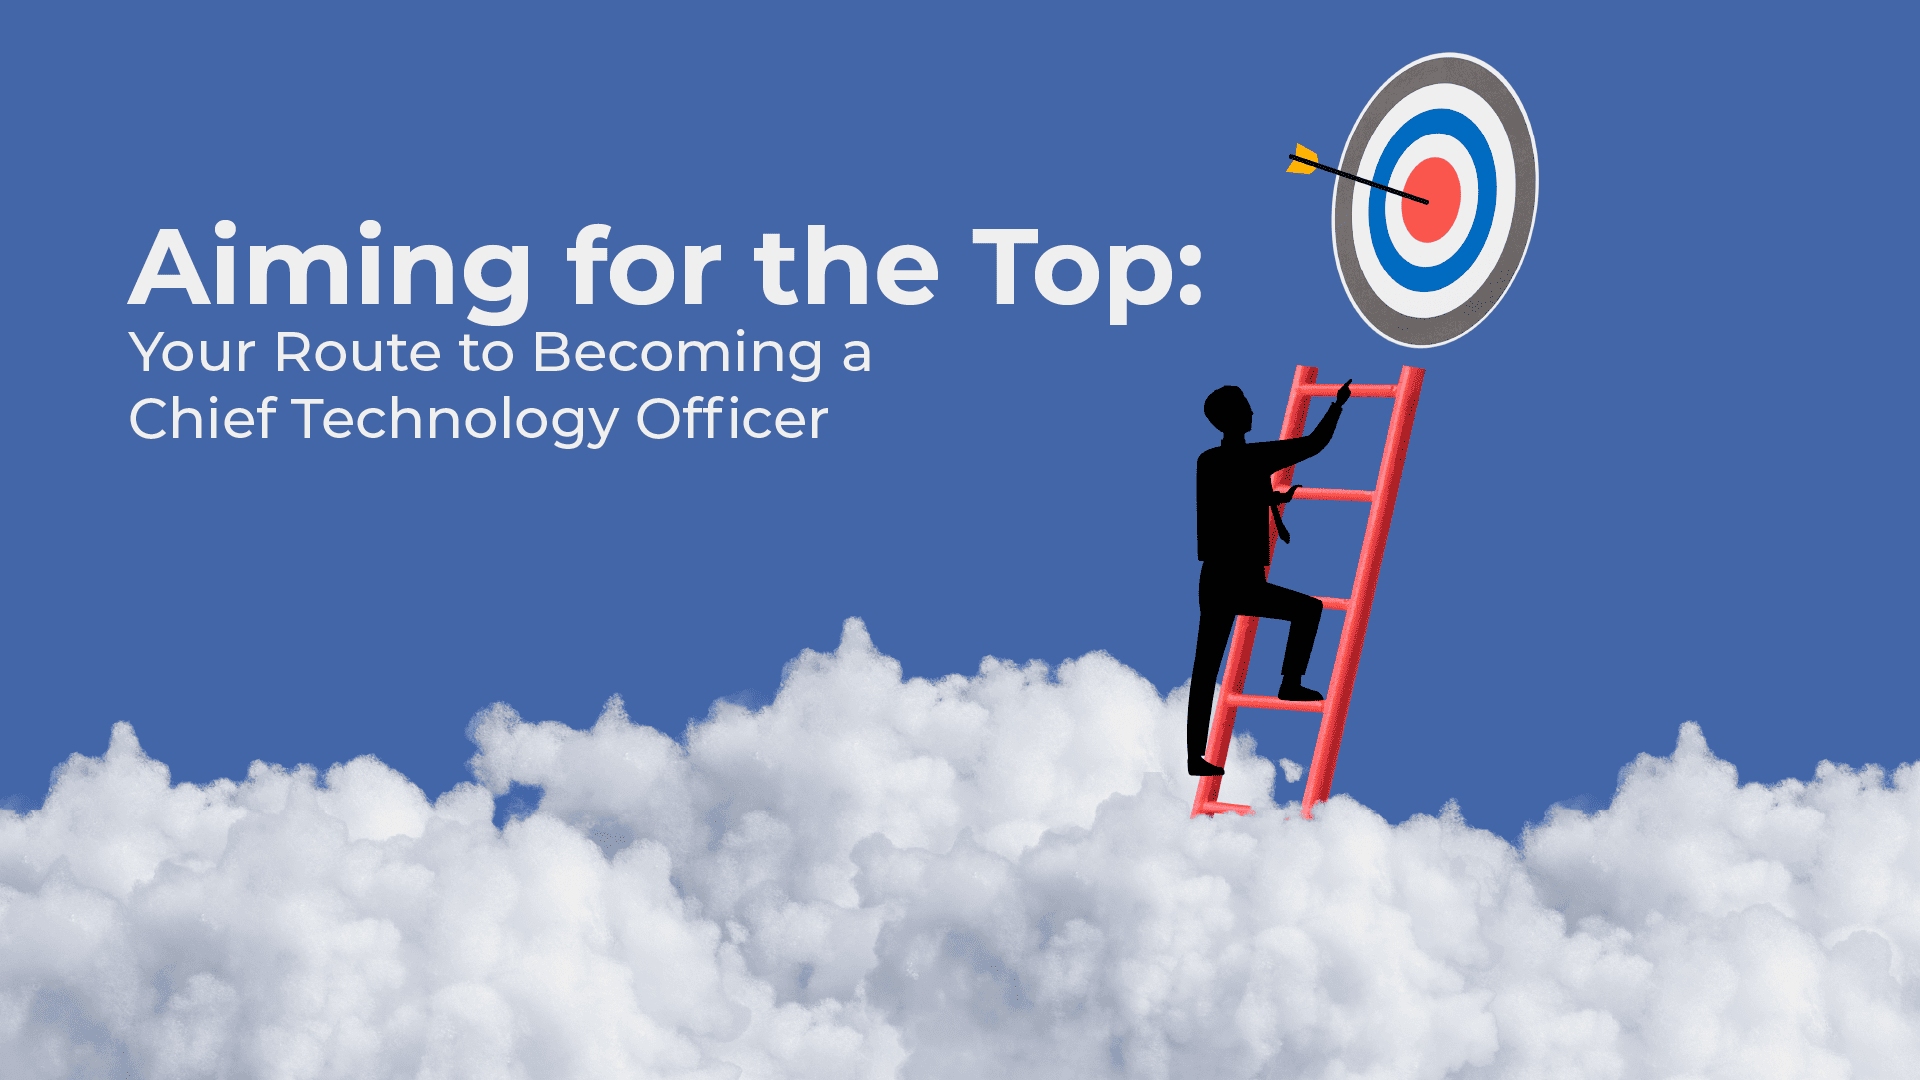 Aiming for the Top: Your Route to Becoming a Chief Technology Officer